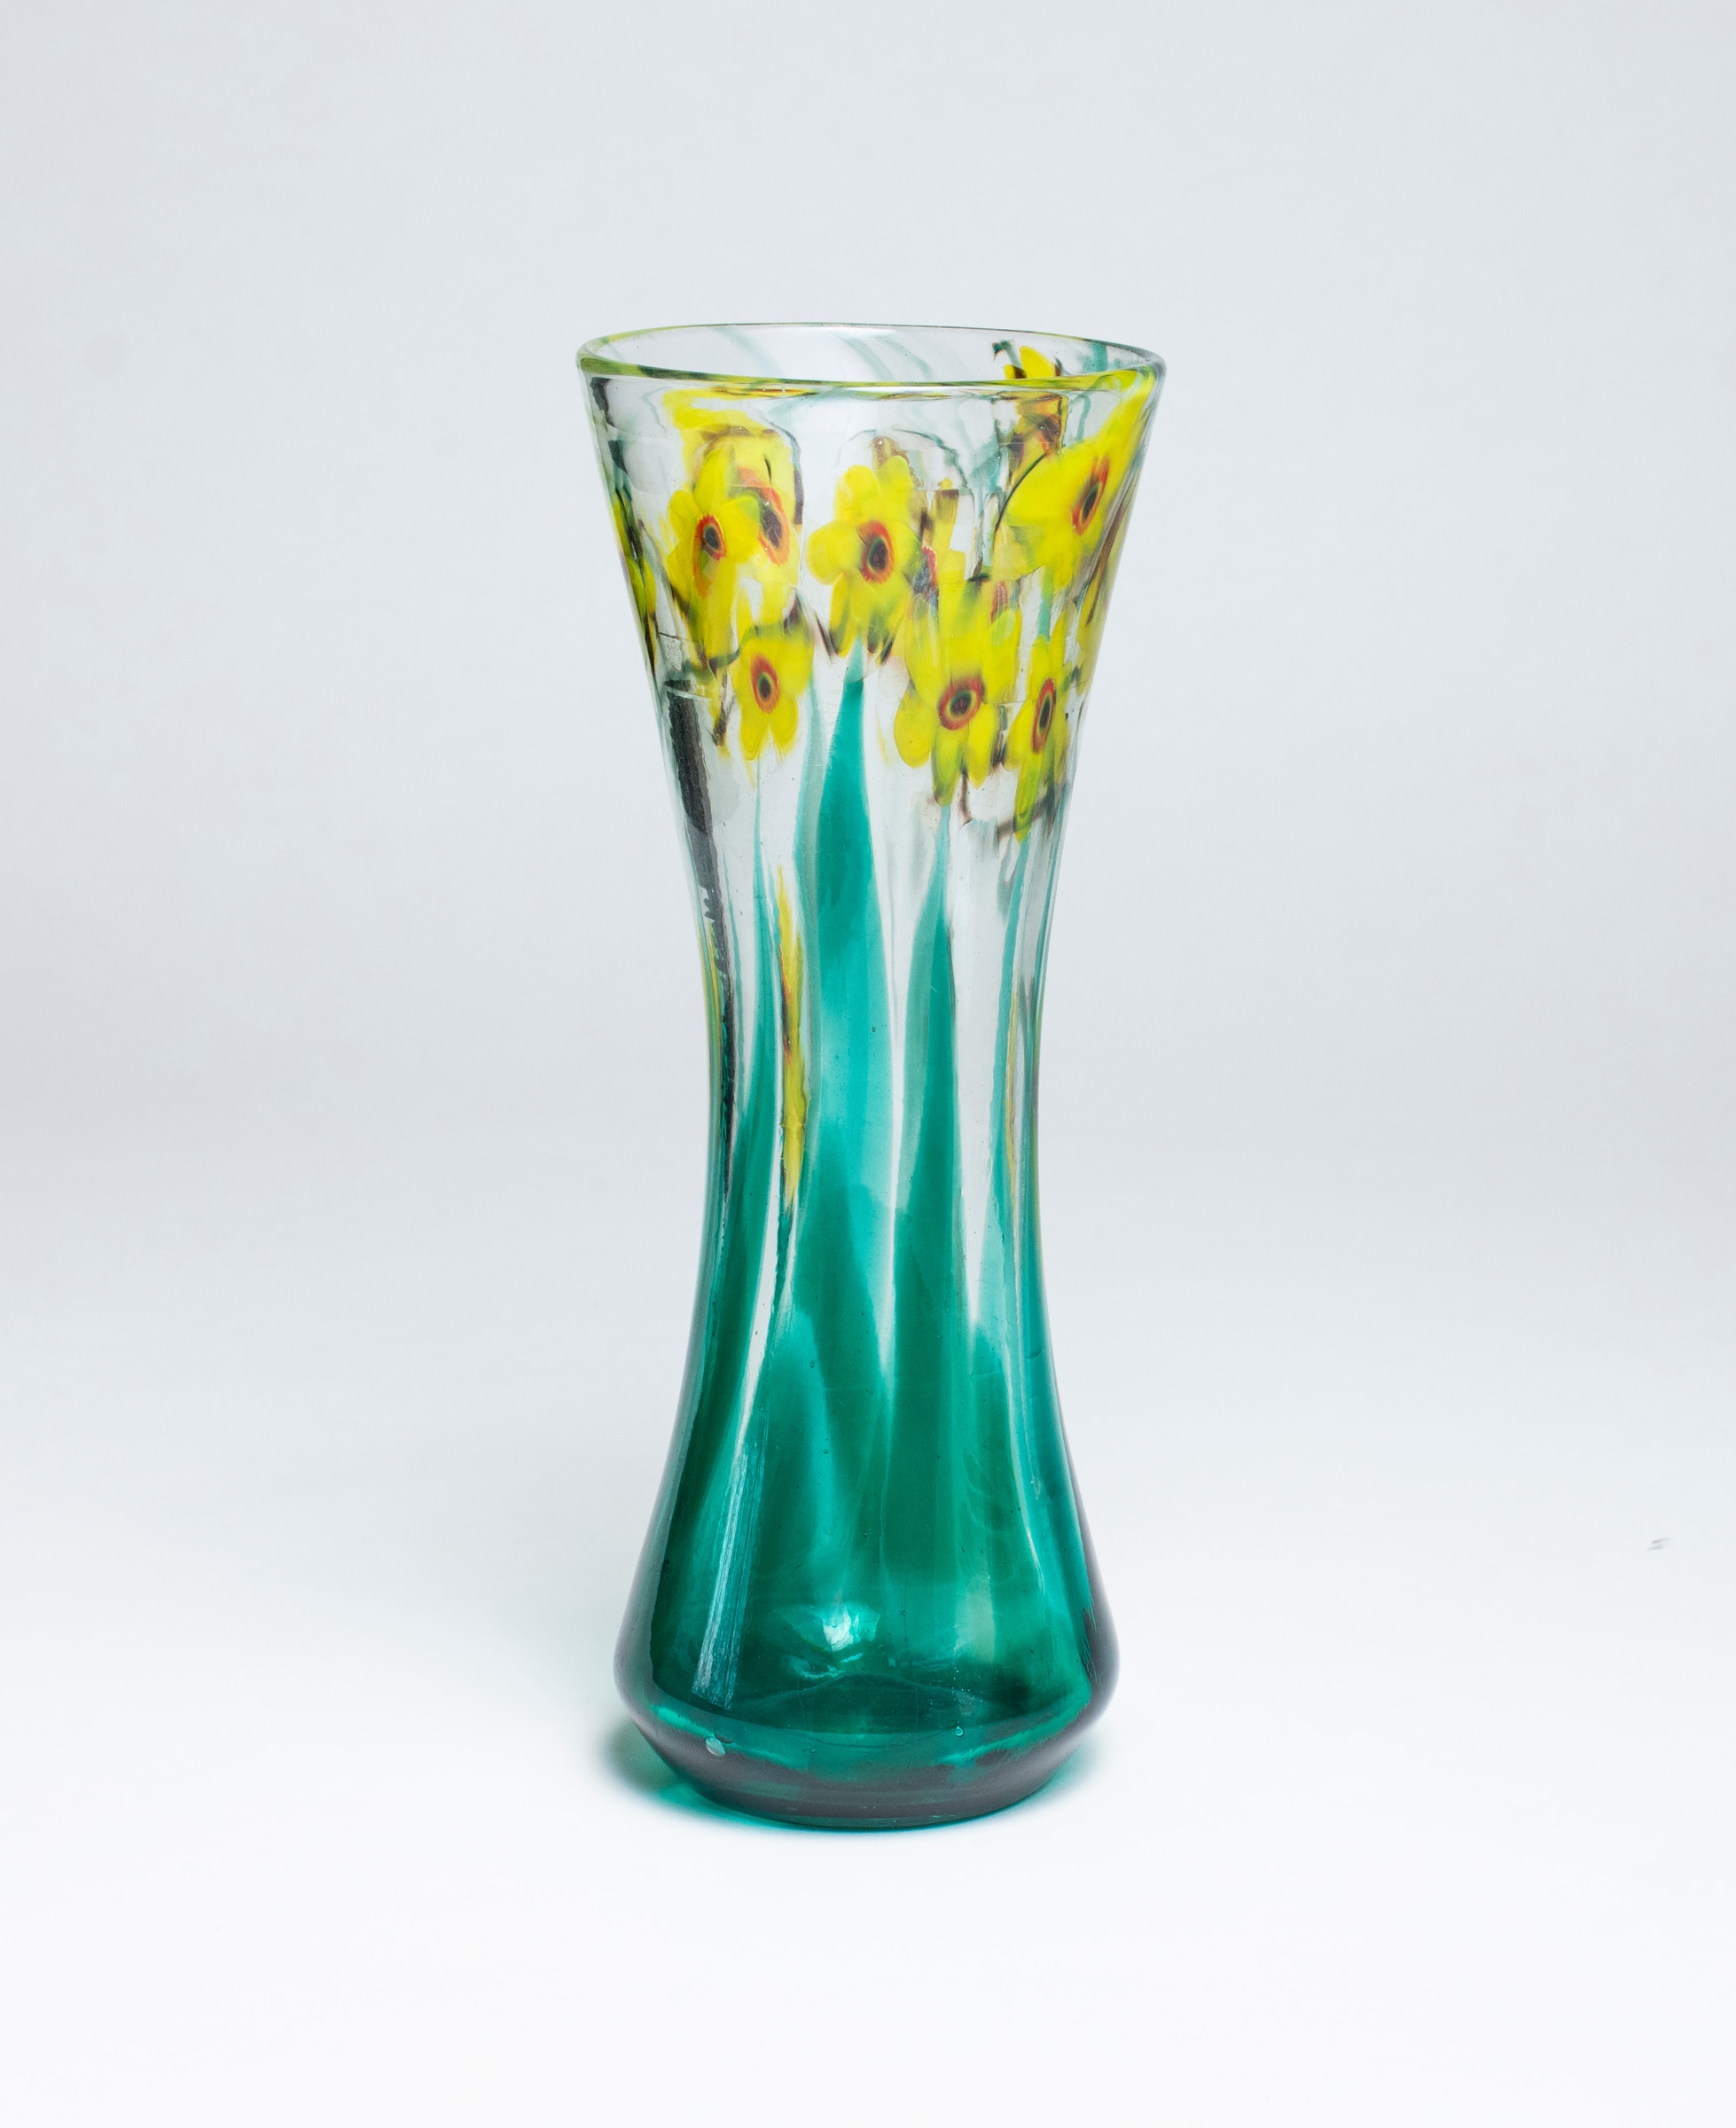 A tiffany favrile glass paperweight vase, cylindrical form with slightly cinched waist and flared rim, the clear glass with motif of bright yellow flowers with five petals and red centers, rising from transparent green stems.